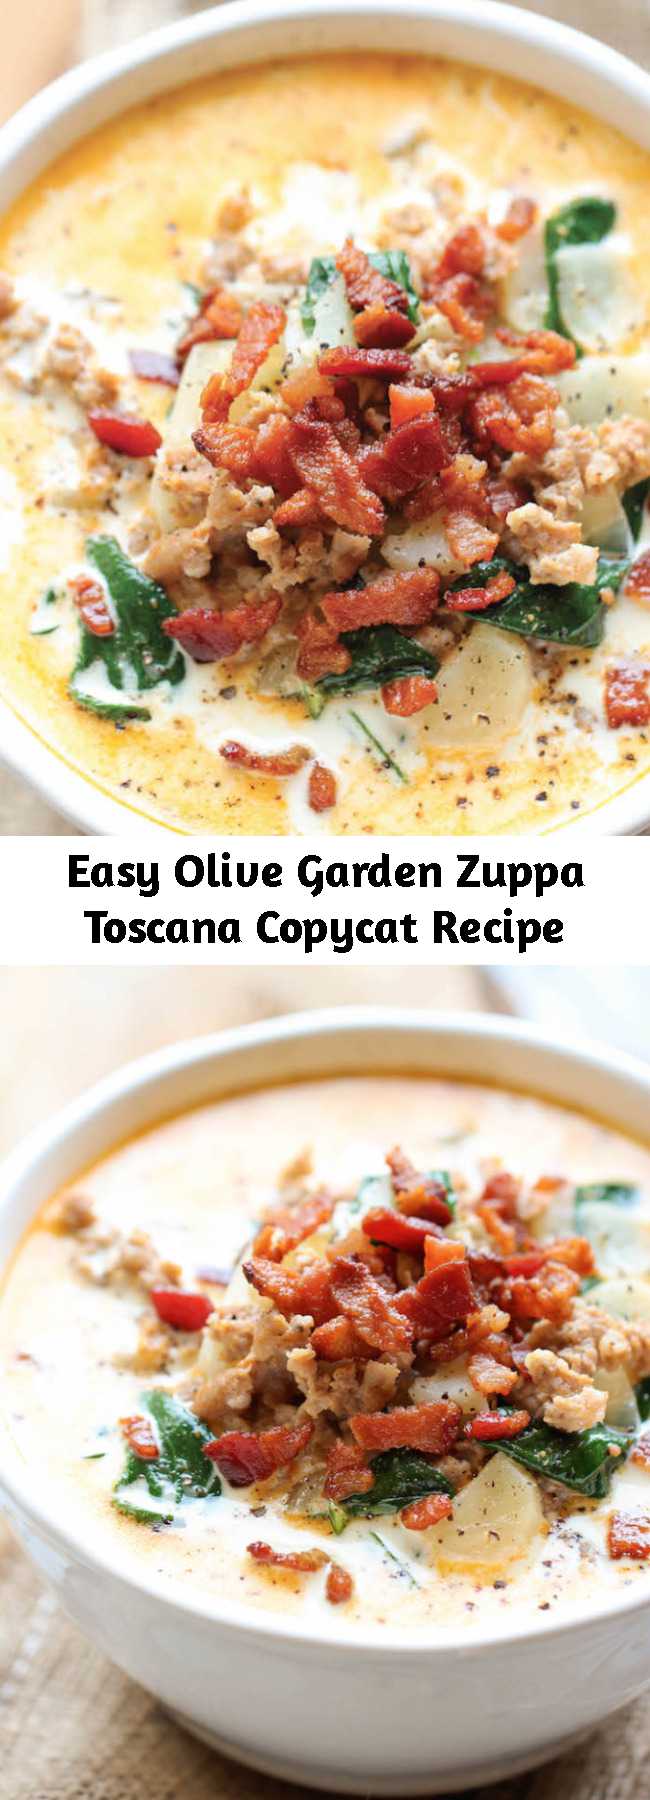 Easy Olive Garden Zuppa Toscana Copycat Recipe - This copycat recipe is budget-friendly, incredibly easy to make, and tastes a million times better than the original!